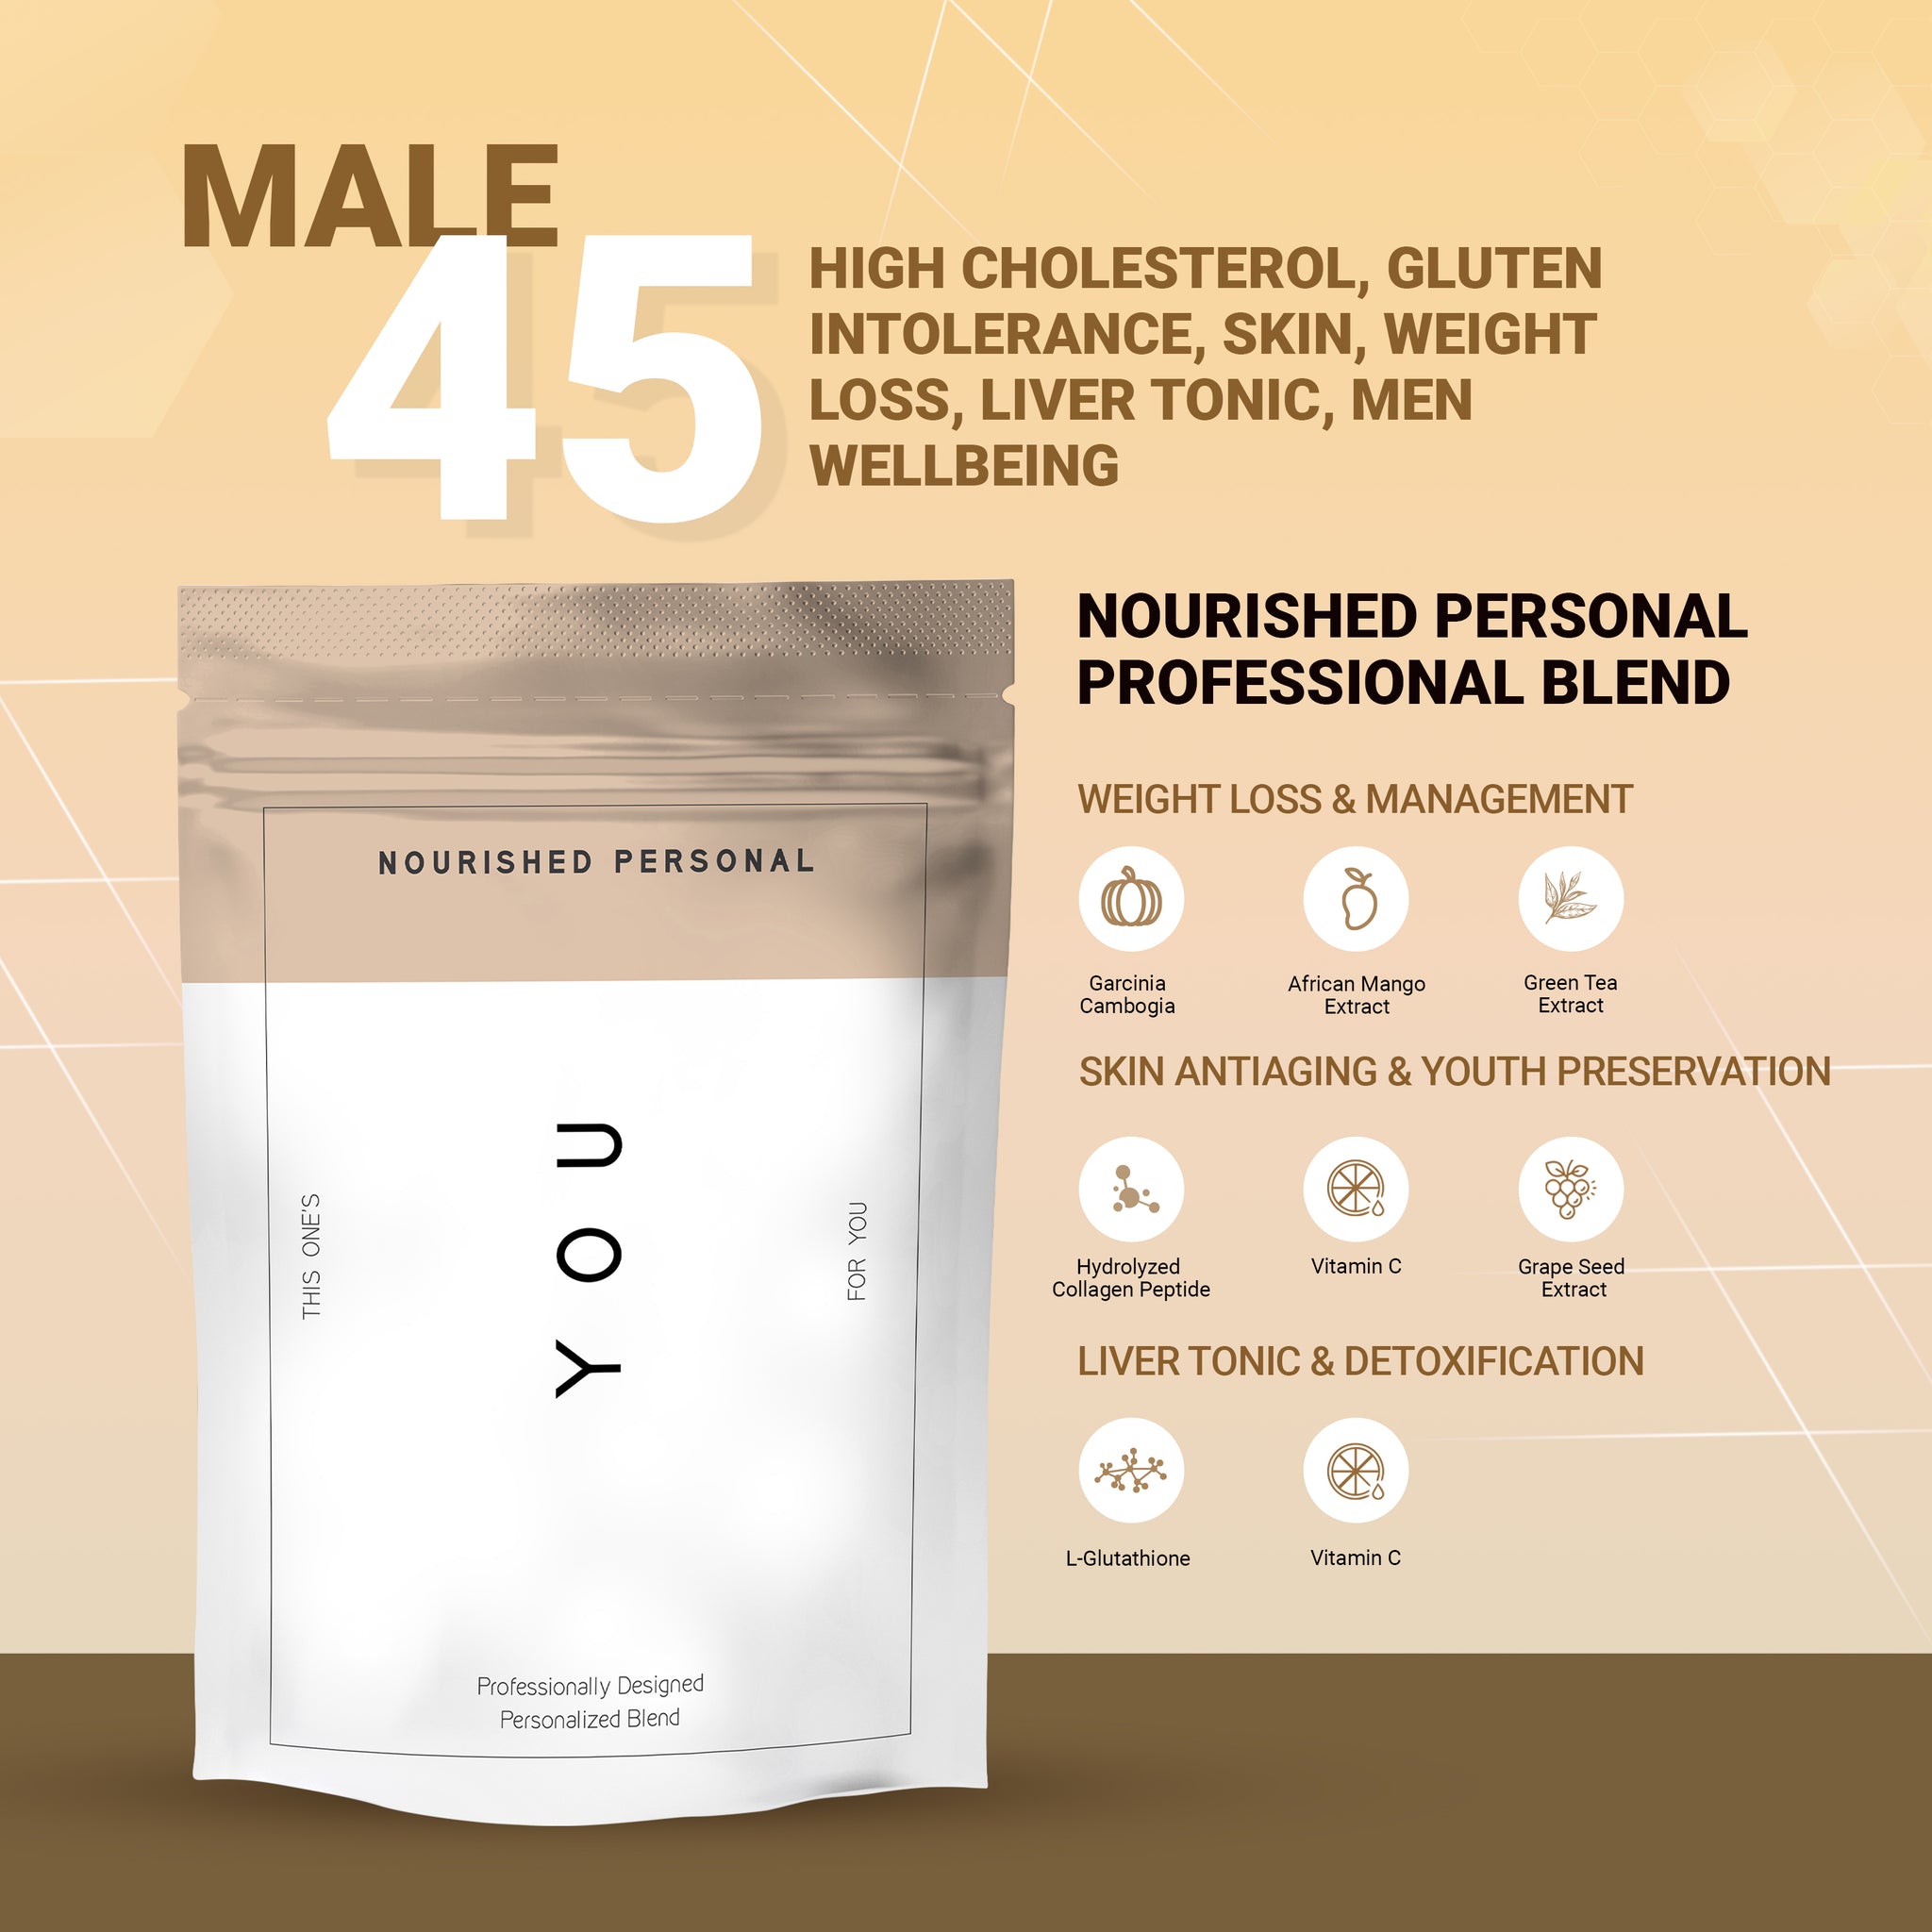 Case Study 24: Male, 45 - High Cholesterol, Gluten Intolerance, Skin, Weight Loss, Liver Tonic, Men Wellbeing